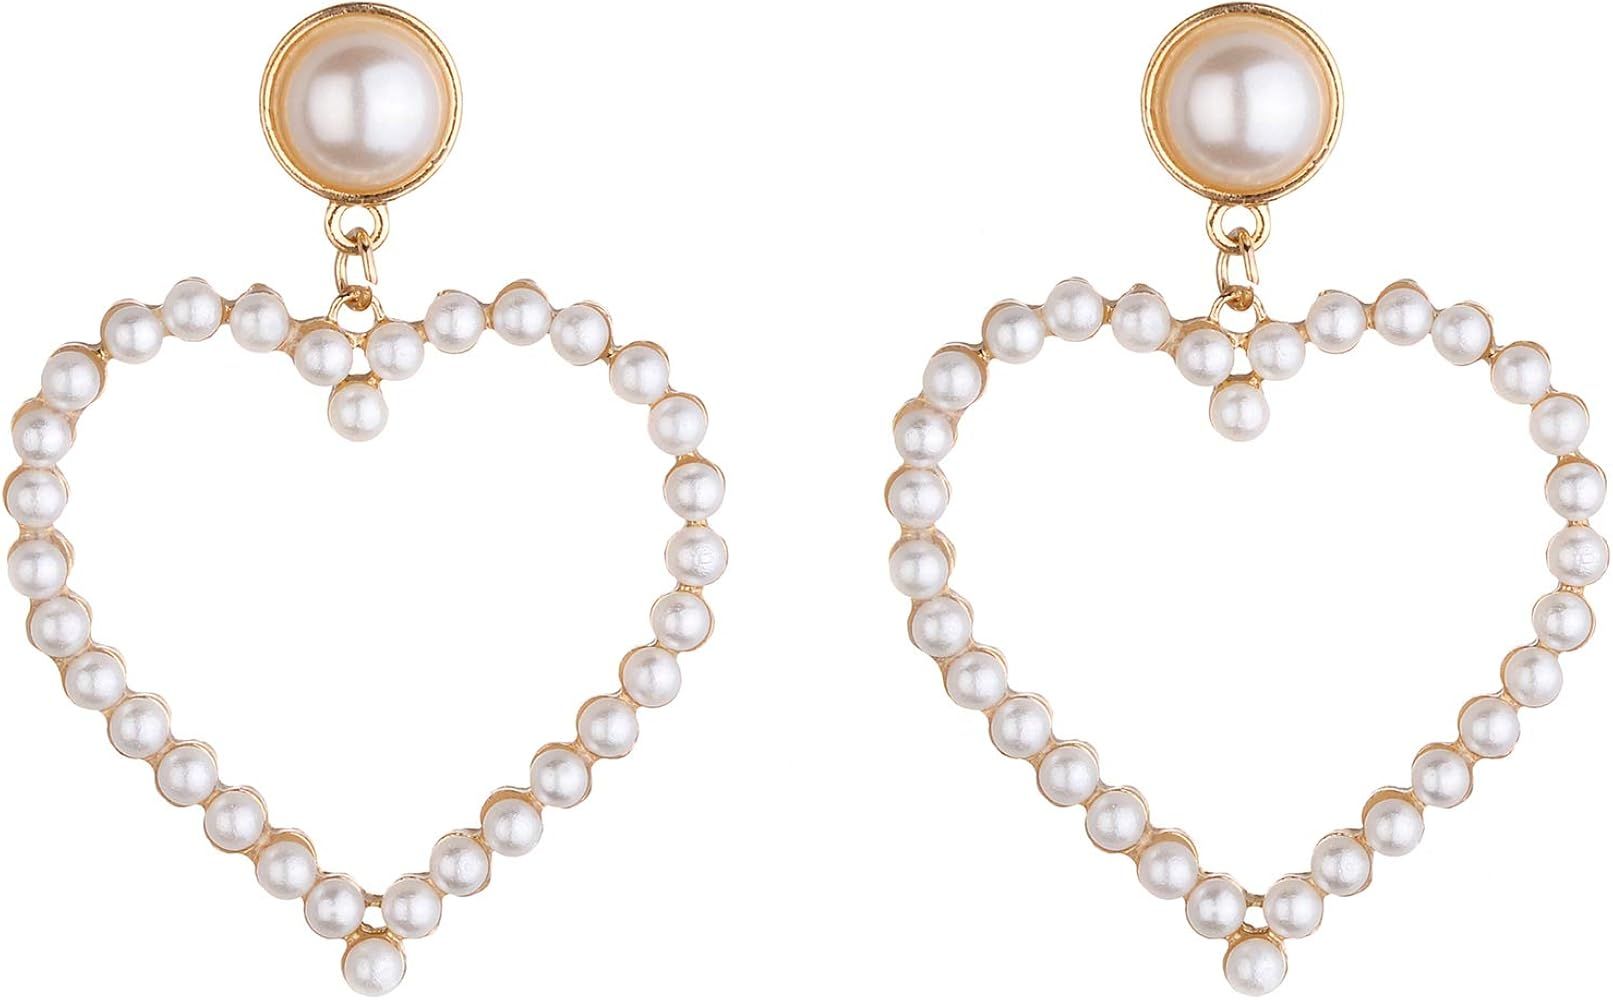 Lux Accessories Heart Shaped White Pearls Fashion Dangle Earrings | Amazon (US)